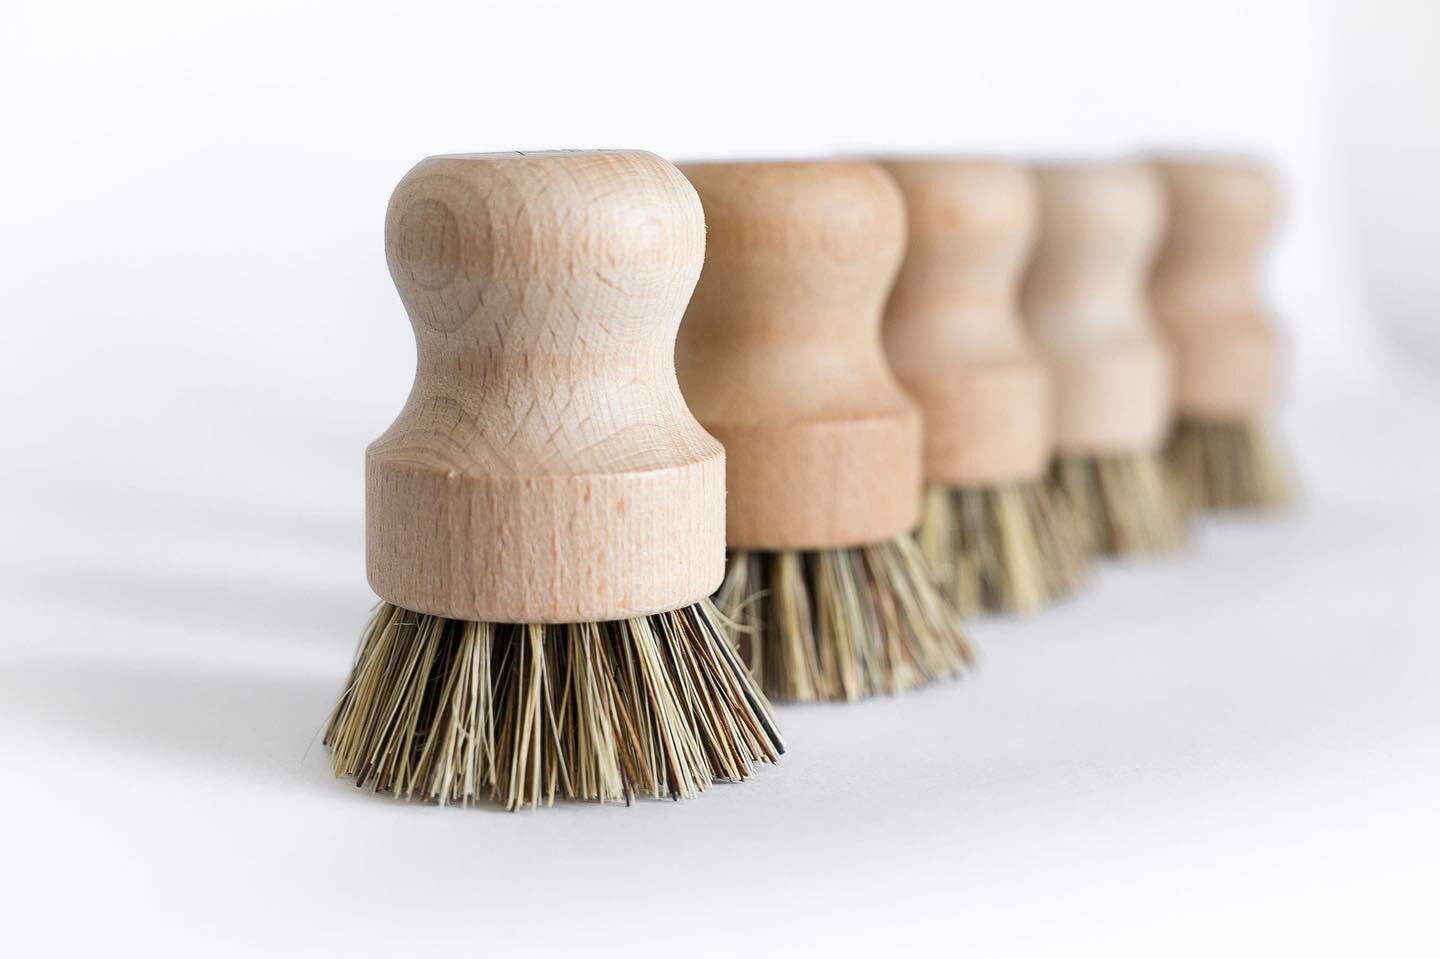 Are you ready for your brush crush? It&rsquo;s dropping with our launch! Stay tuned 

.
.
.
#zerowastelife #therefilleryyxe #saskatoon #rethink #reuse #refill #ecostore #shoplocal #localsaskatoon #zerowastejourney #zerowasteliving #zerowaste #refille